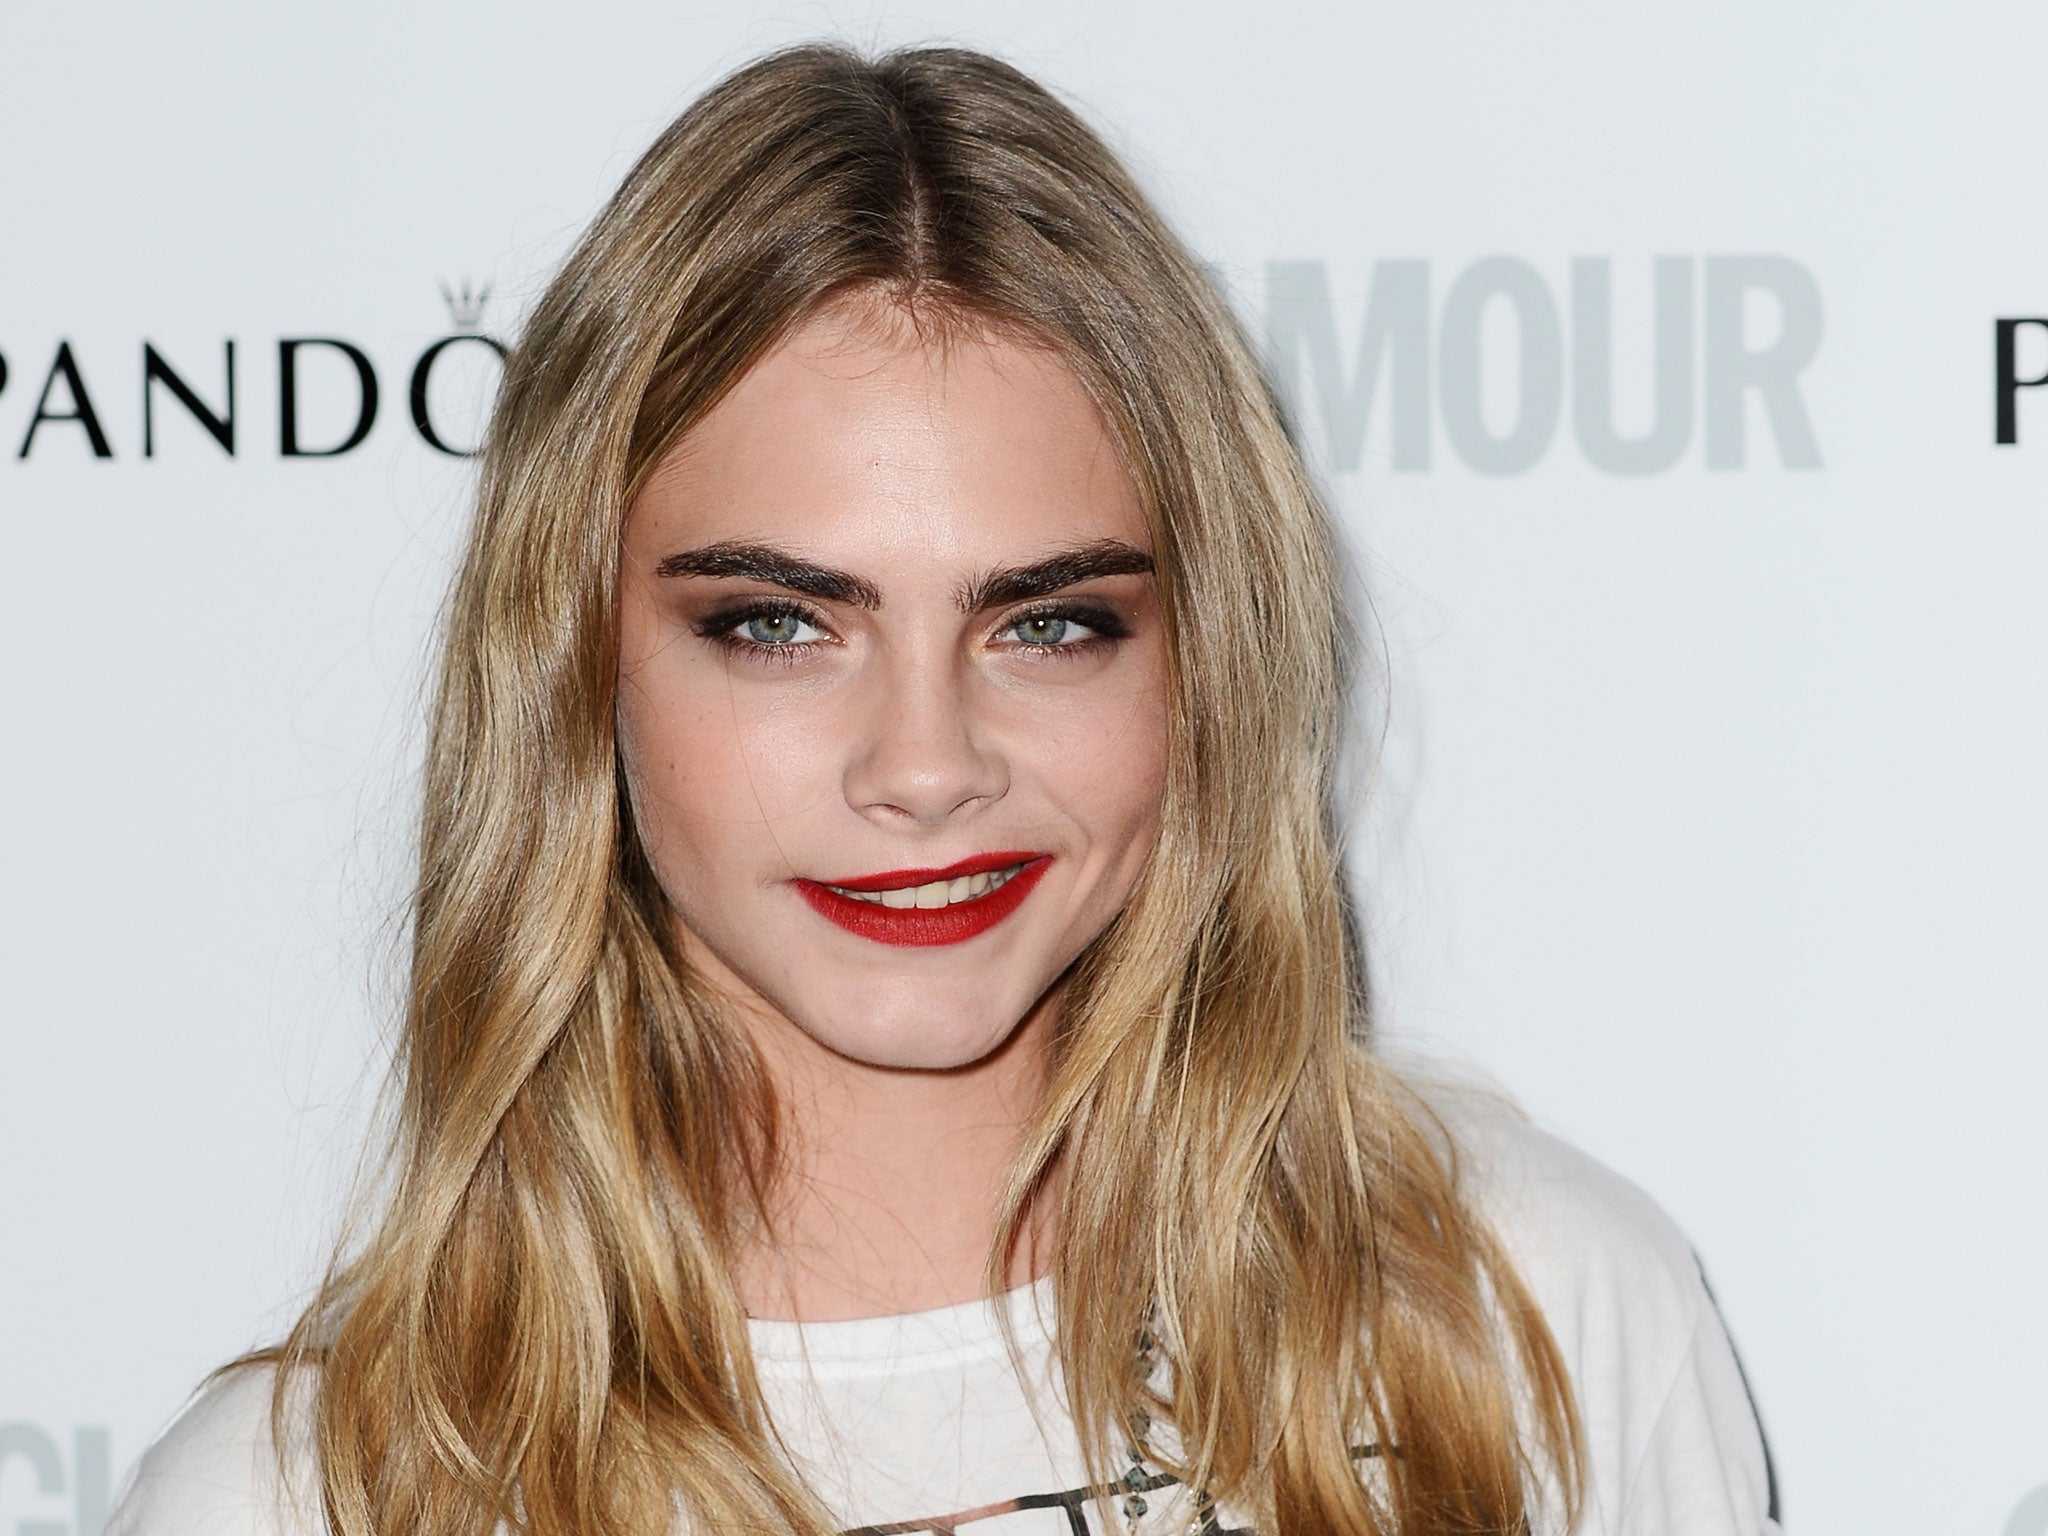 Cara Delevingne, who makes her TV acting debut this week, said she only started modelling to pay for drama school